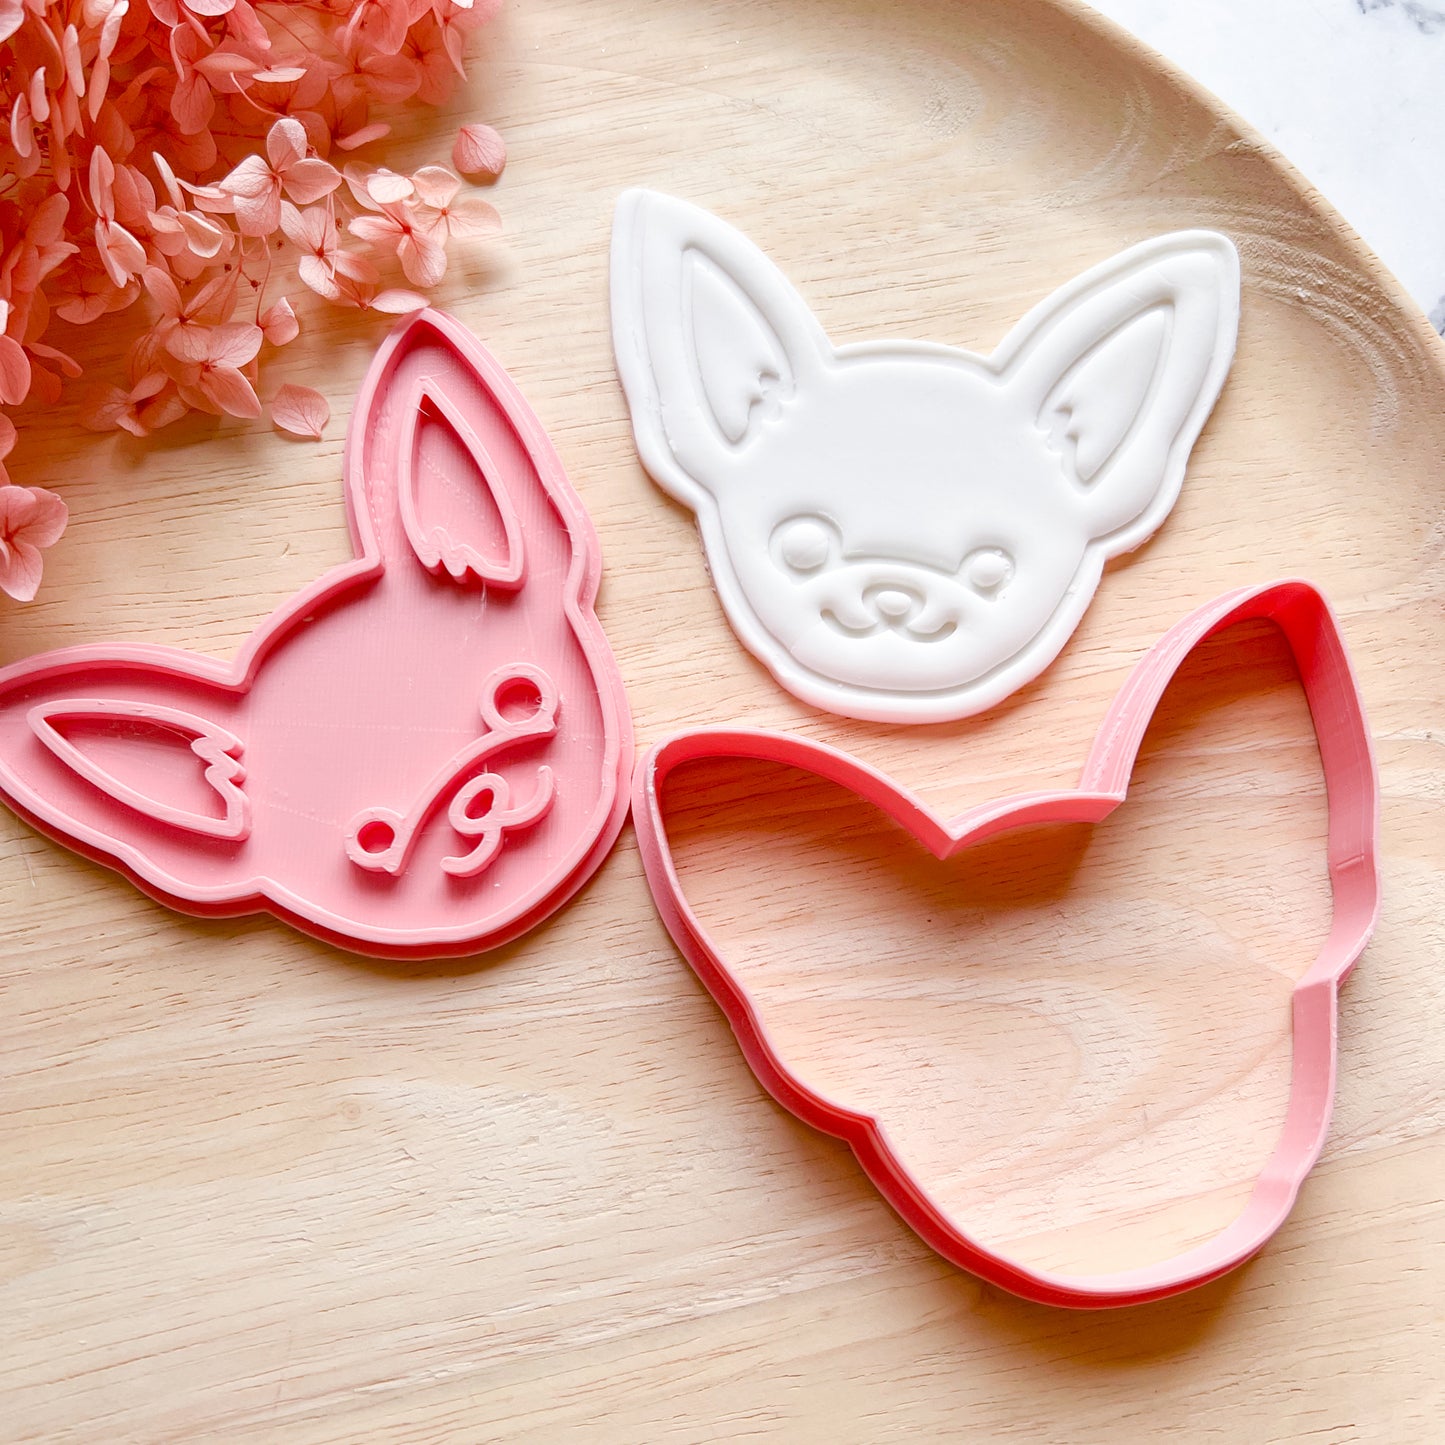 Chiwauwa Cookie Cutter & Stamp